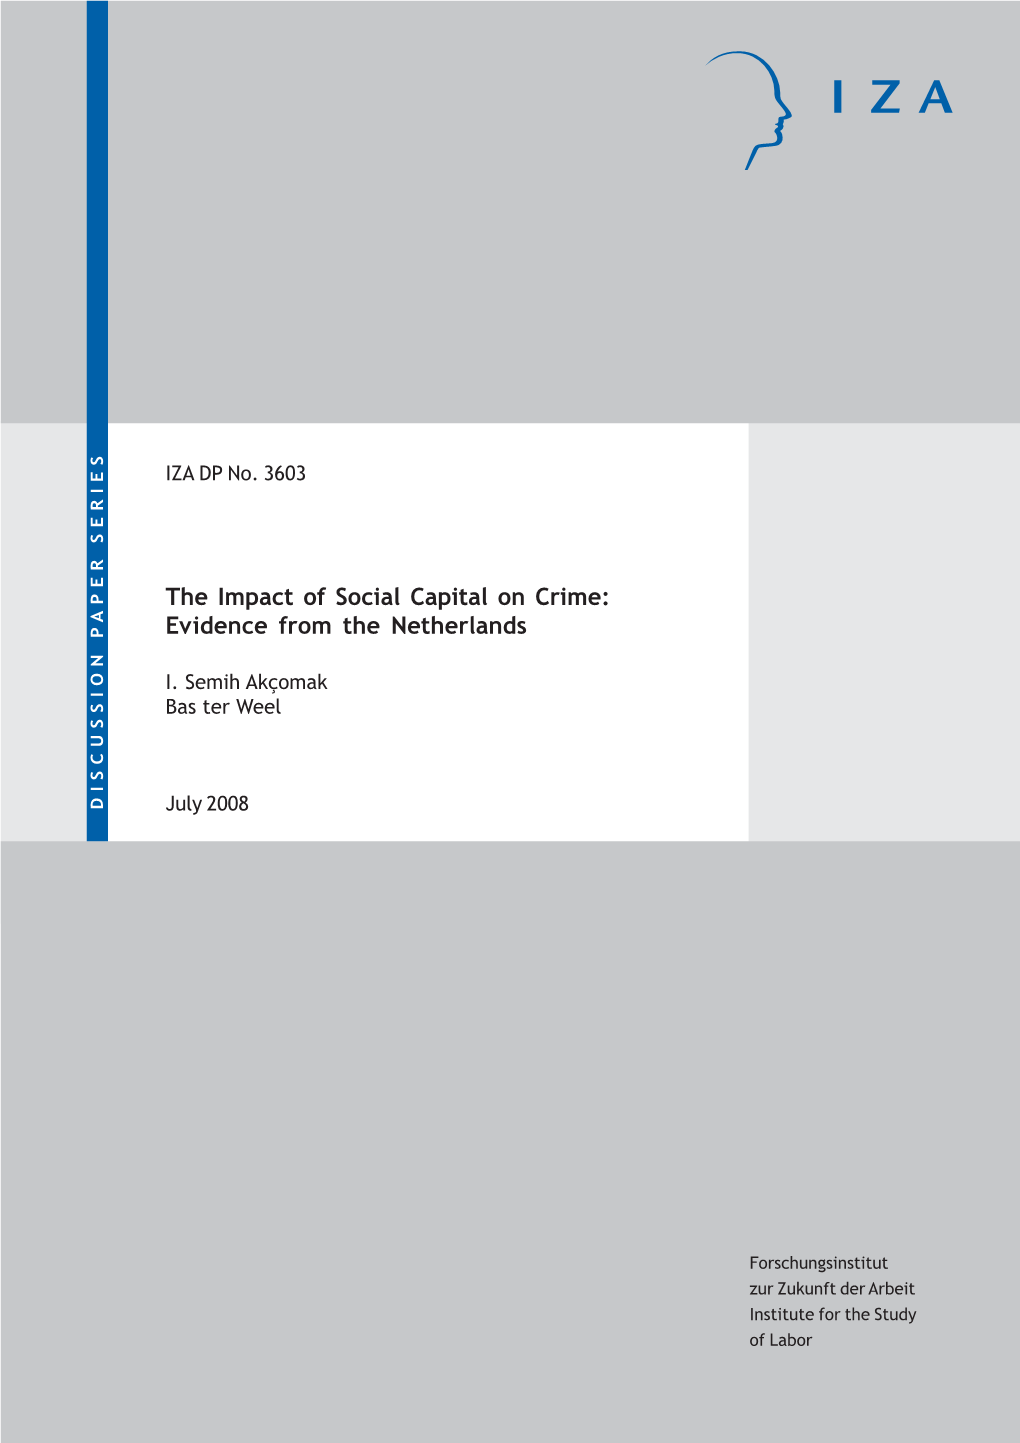 The Impact of Social Capital on Crime: Evidence from the Netherlands